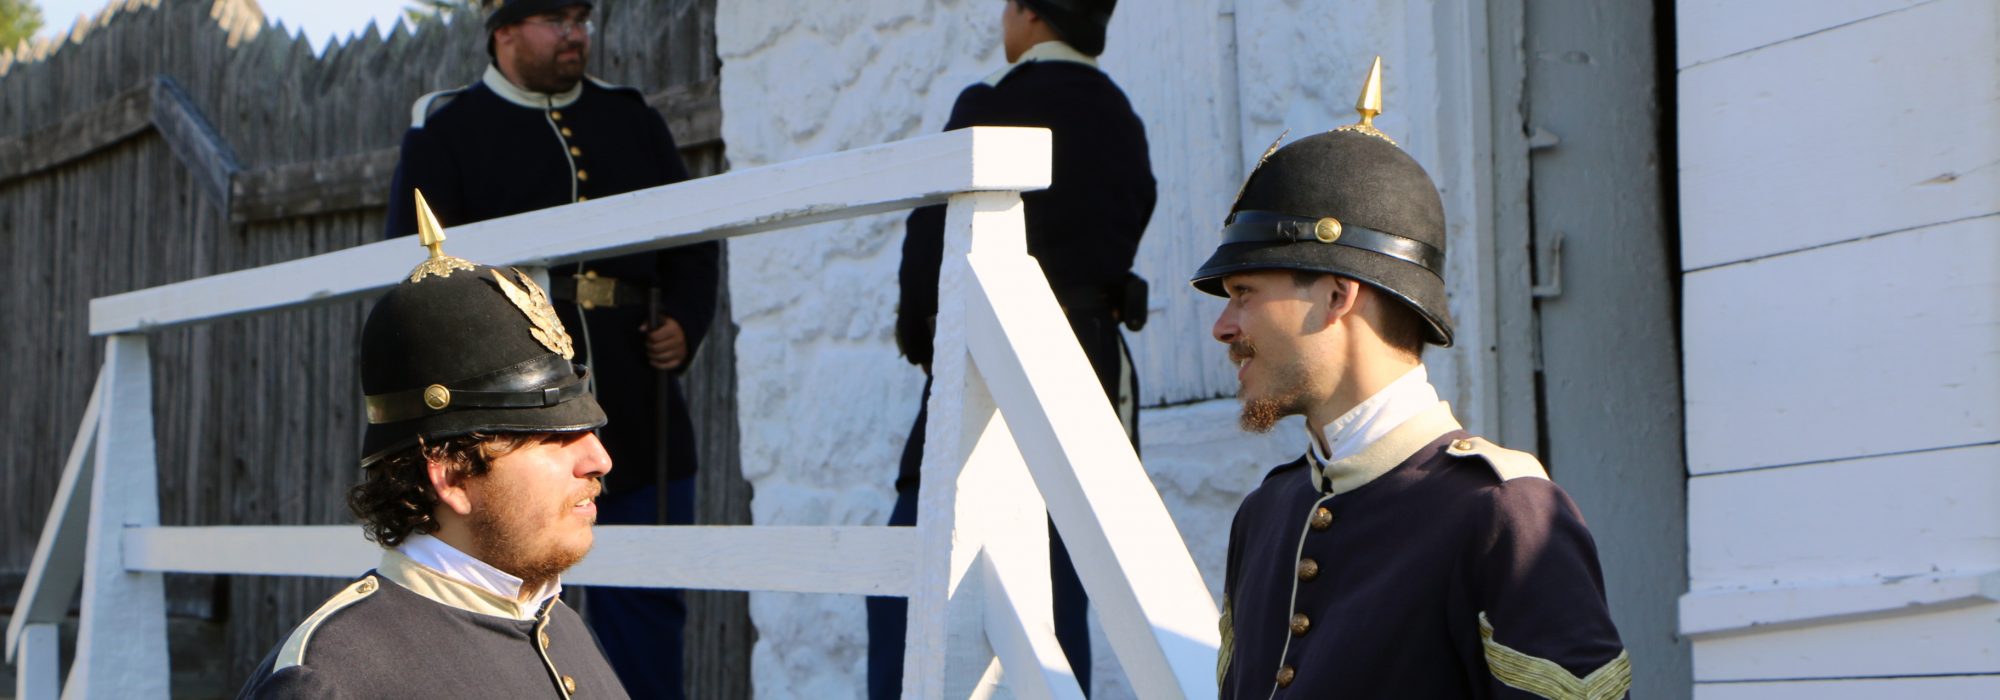 Costumed interpreters dressed as U.S. soldiers from the 1880s in front of the East Blockhouse at Fort Mackinac.